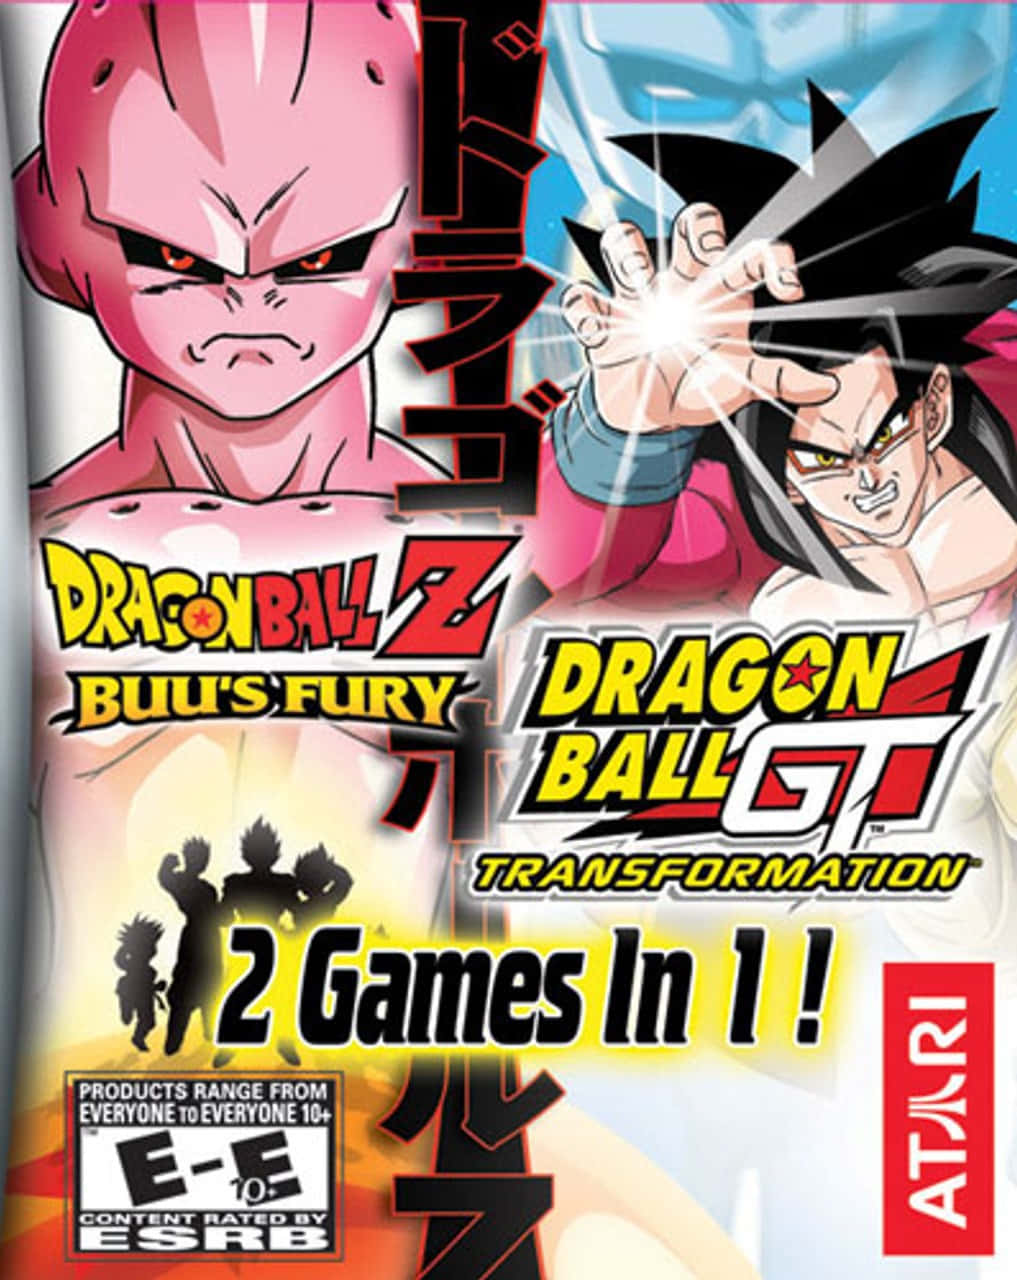 Playing Dragon Ball Z Games: An Unforgettable Experience" Wallpaper